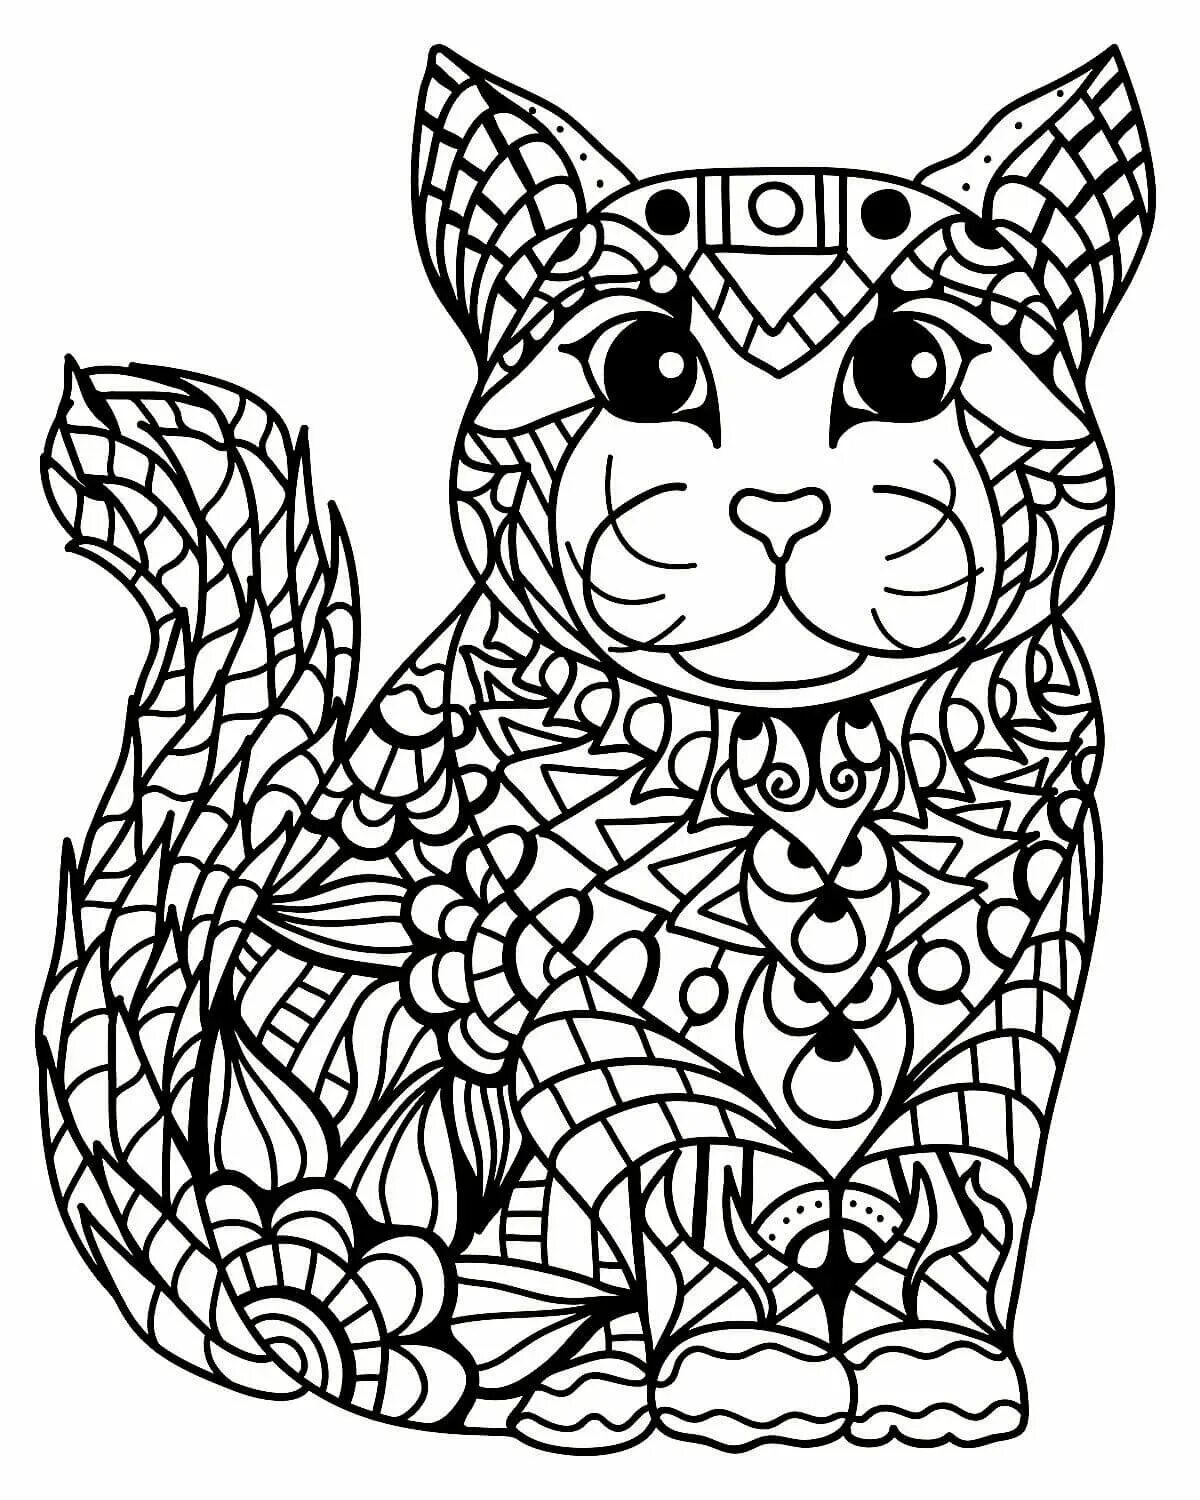 Coloring page gorgeous patterned cat